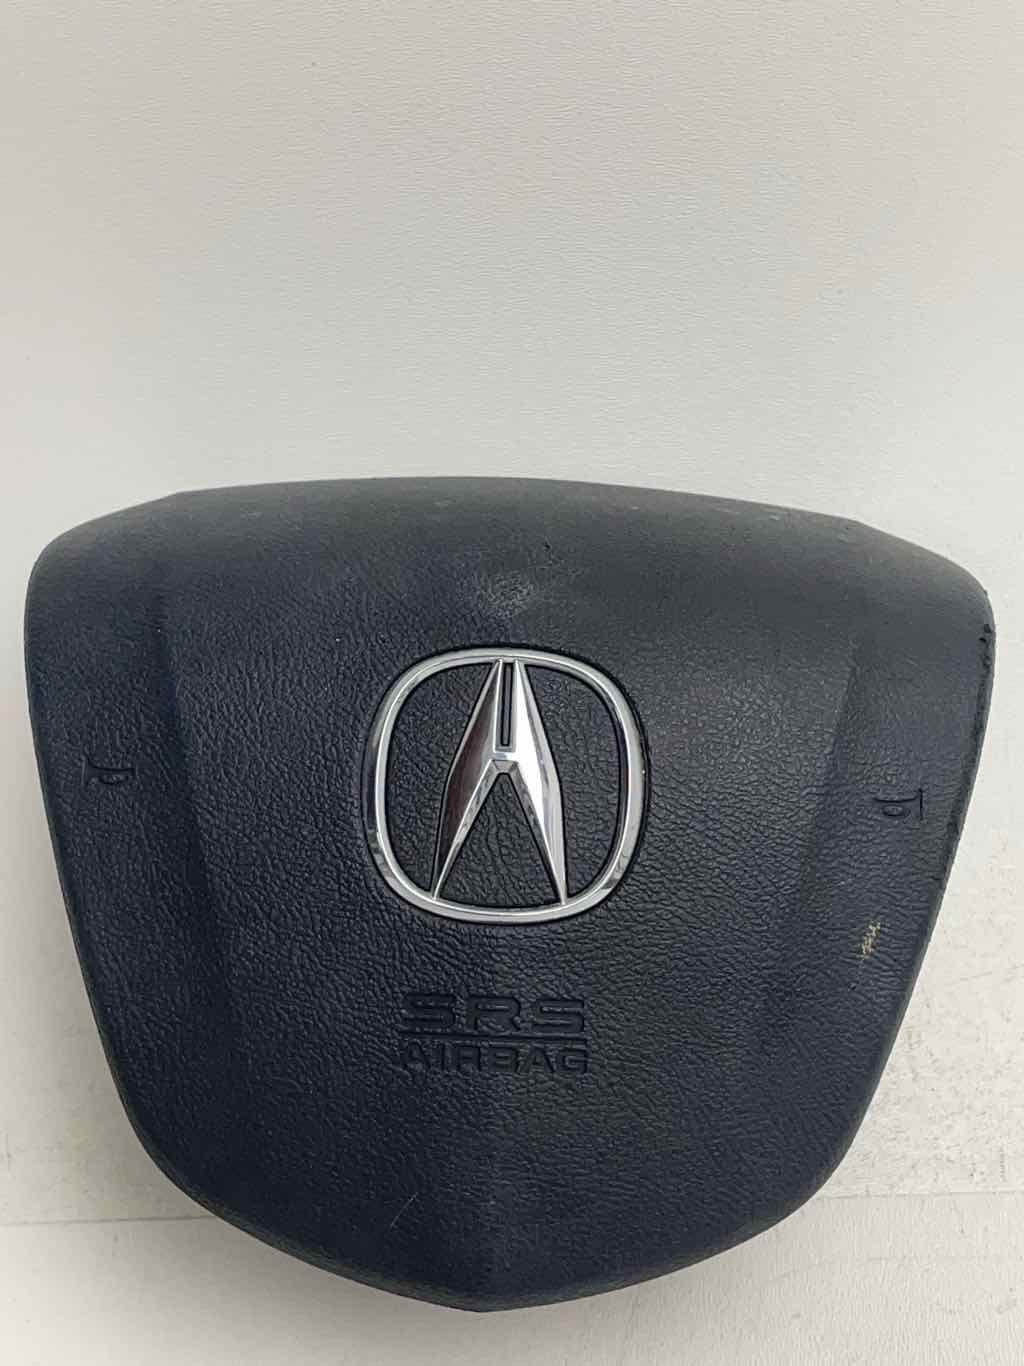 Used LH Driver Steering Wheel Air Bag Fits 14 - 20 ACURA MDX Receipt Available